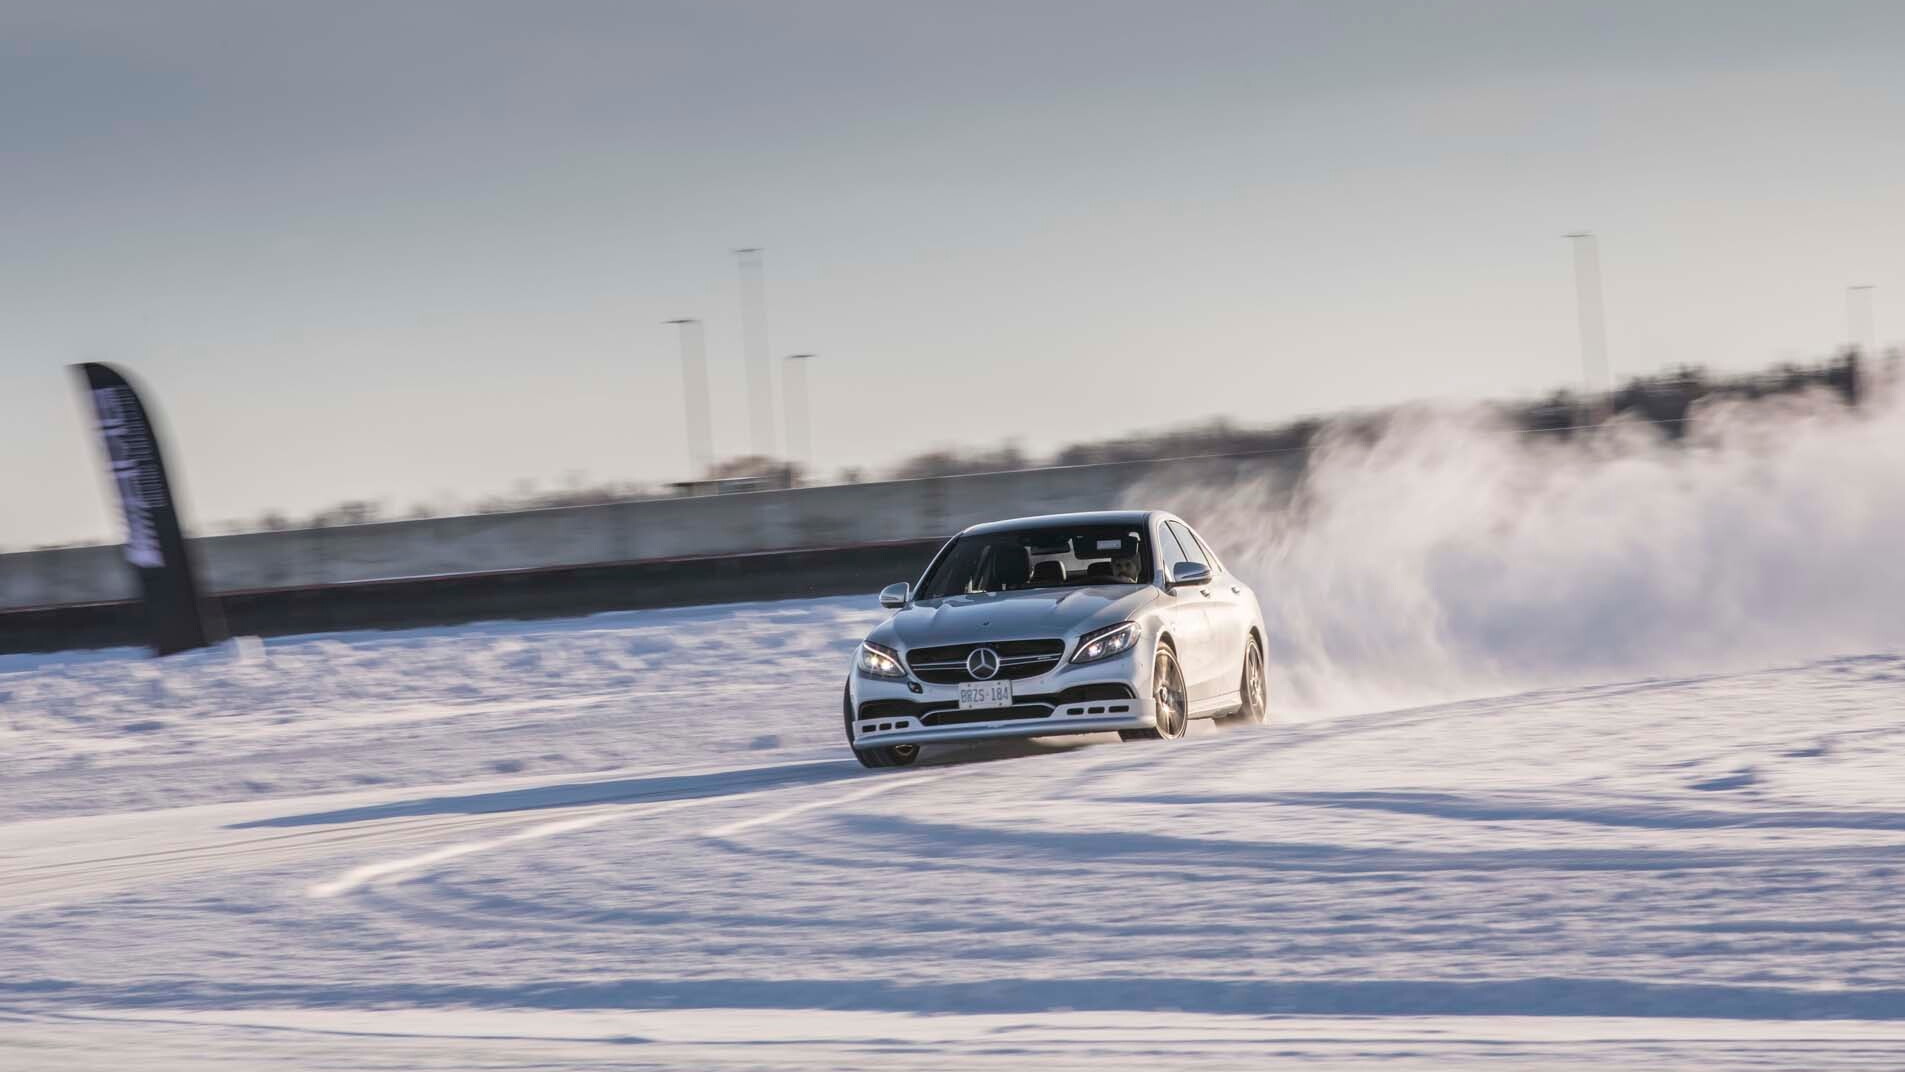 2018 Mercedes-AMG Winter Sporting event